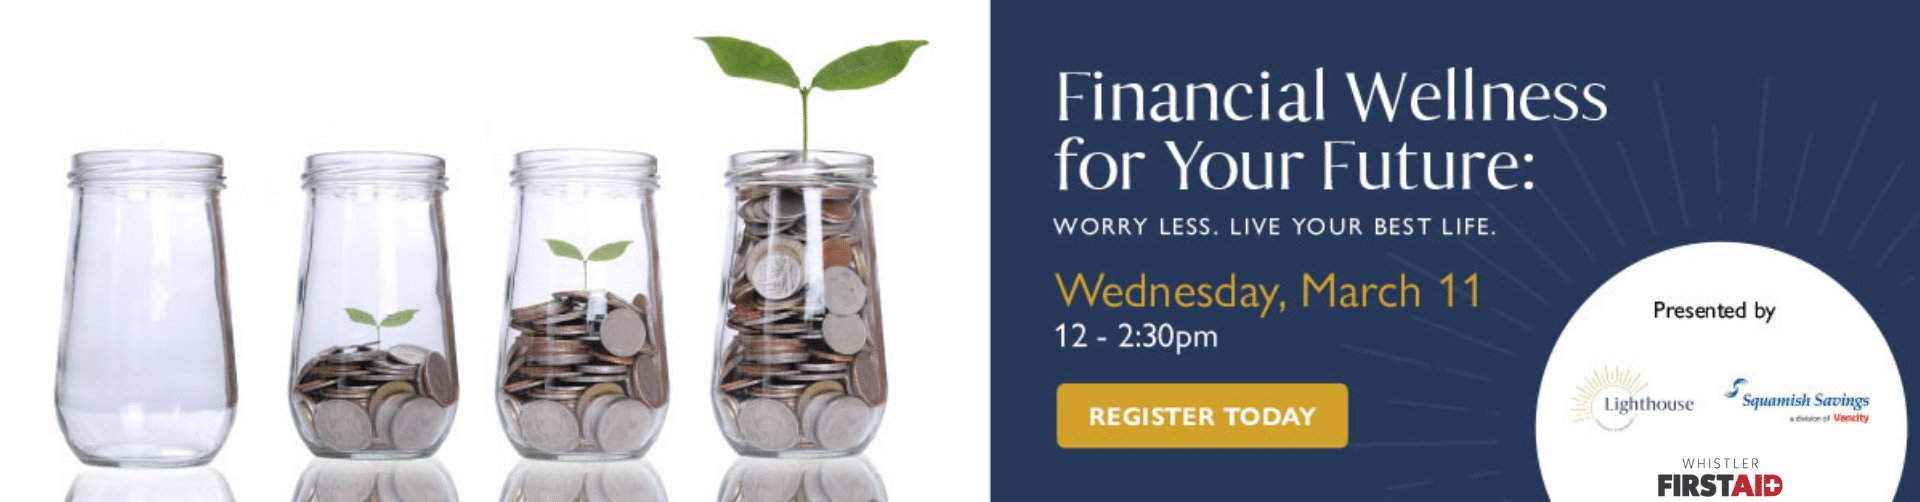 Financial Wellness for your future